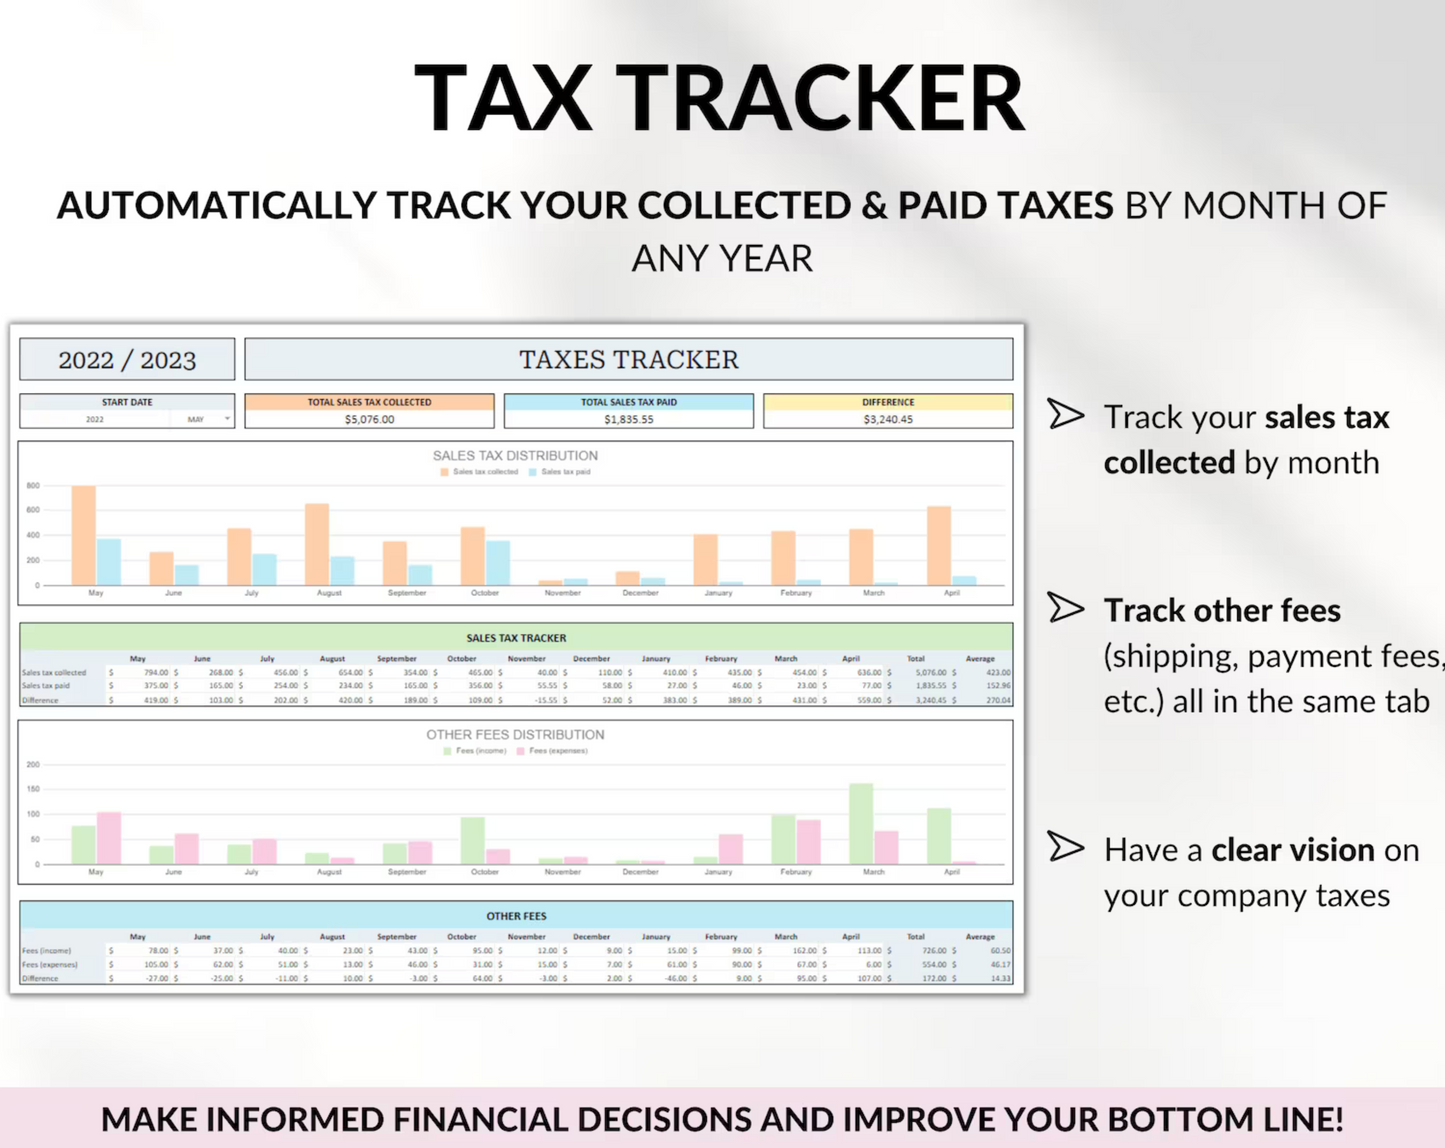 Small Business Management Kit: Inventory, Sales, Orders, Customers and Taxes Tracker